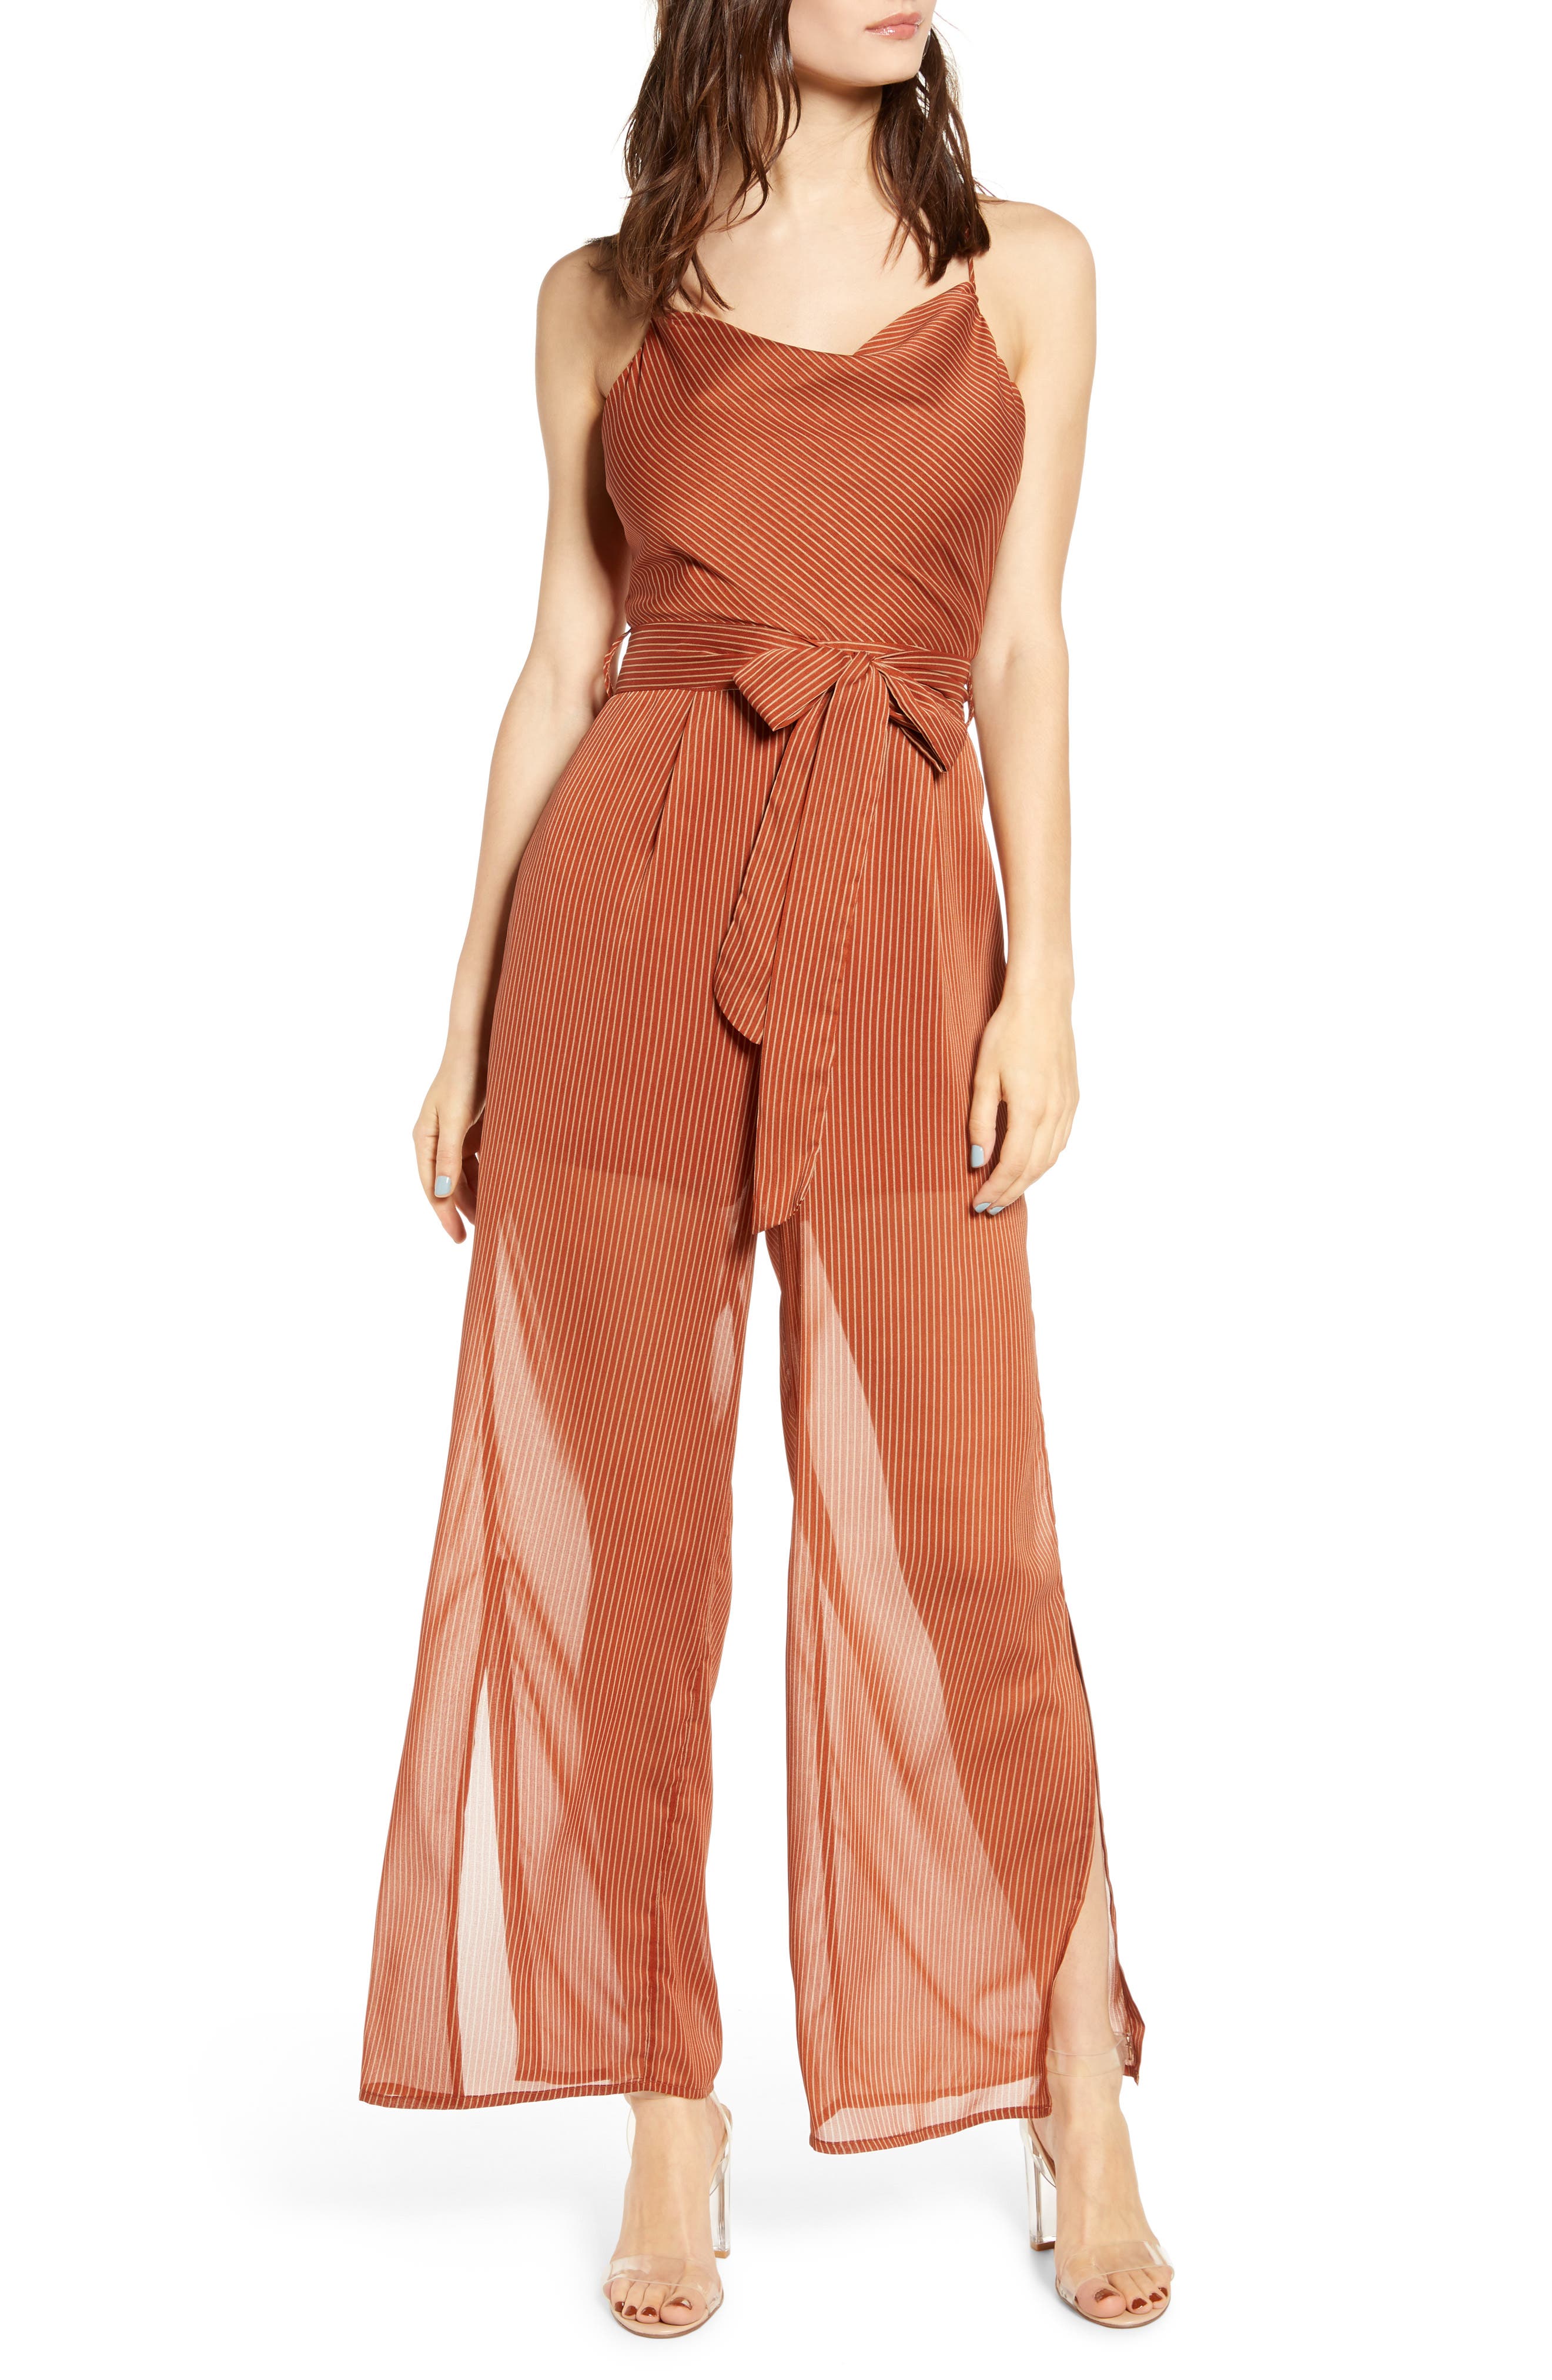 romper pants outfit